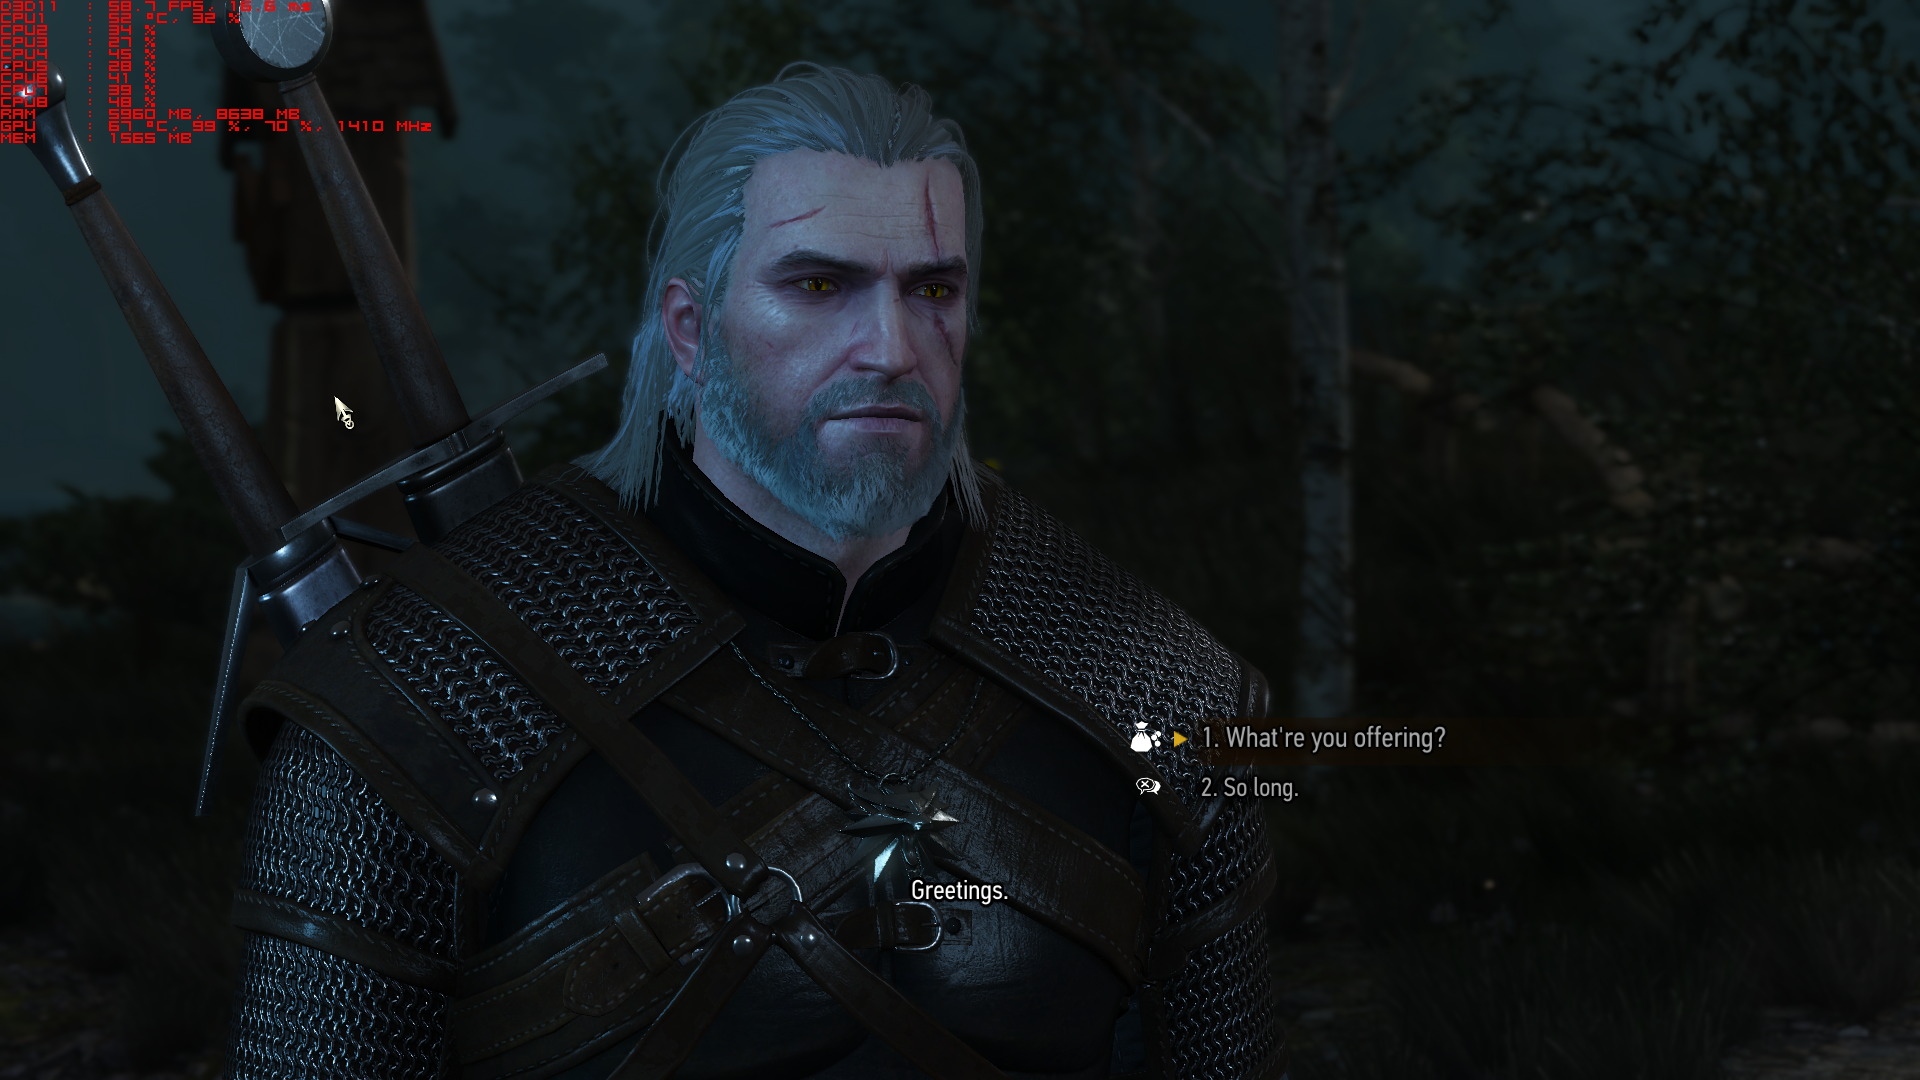 witcher3_2015_05_22_15duv7.png